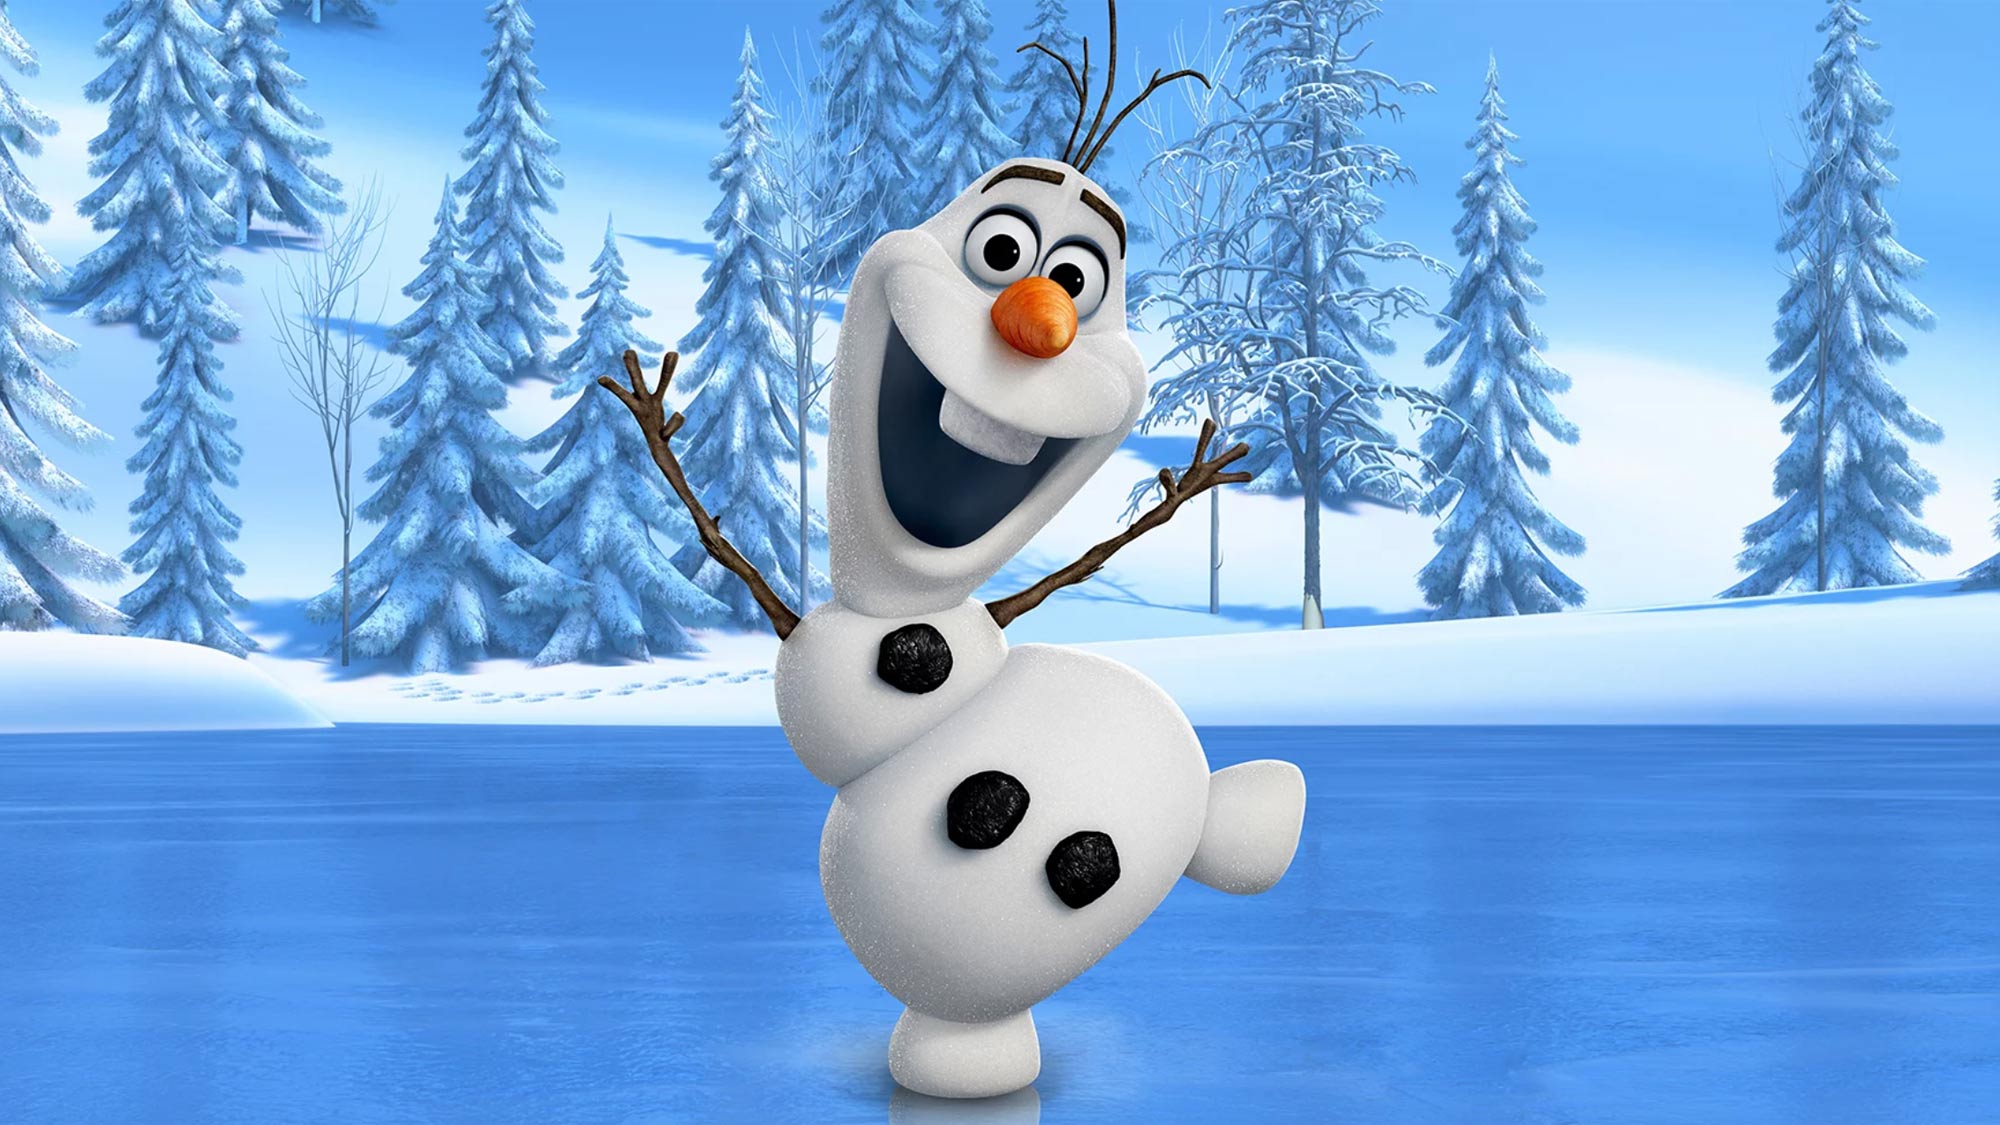 How to watch Olaf movie Once Upon a Snowman on Disney Plus